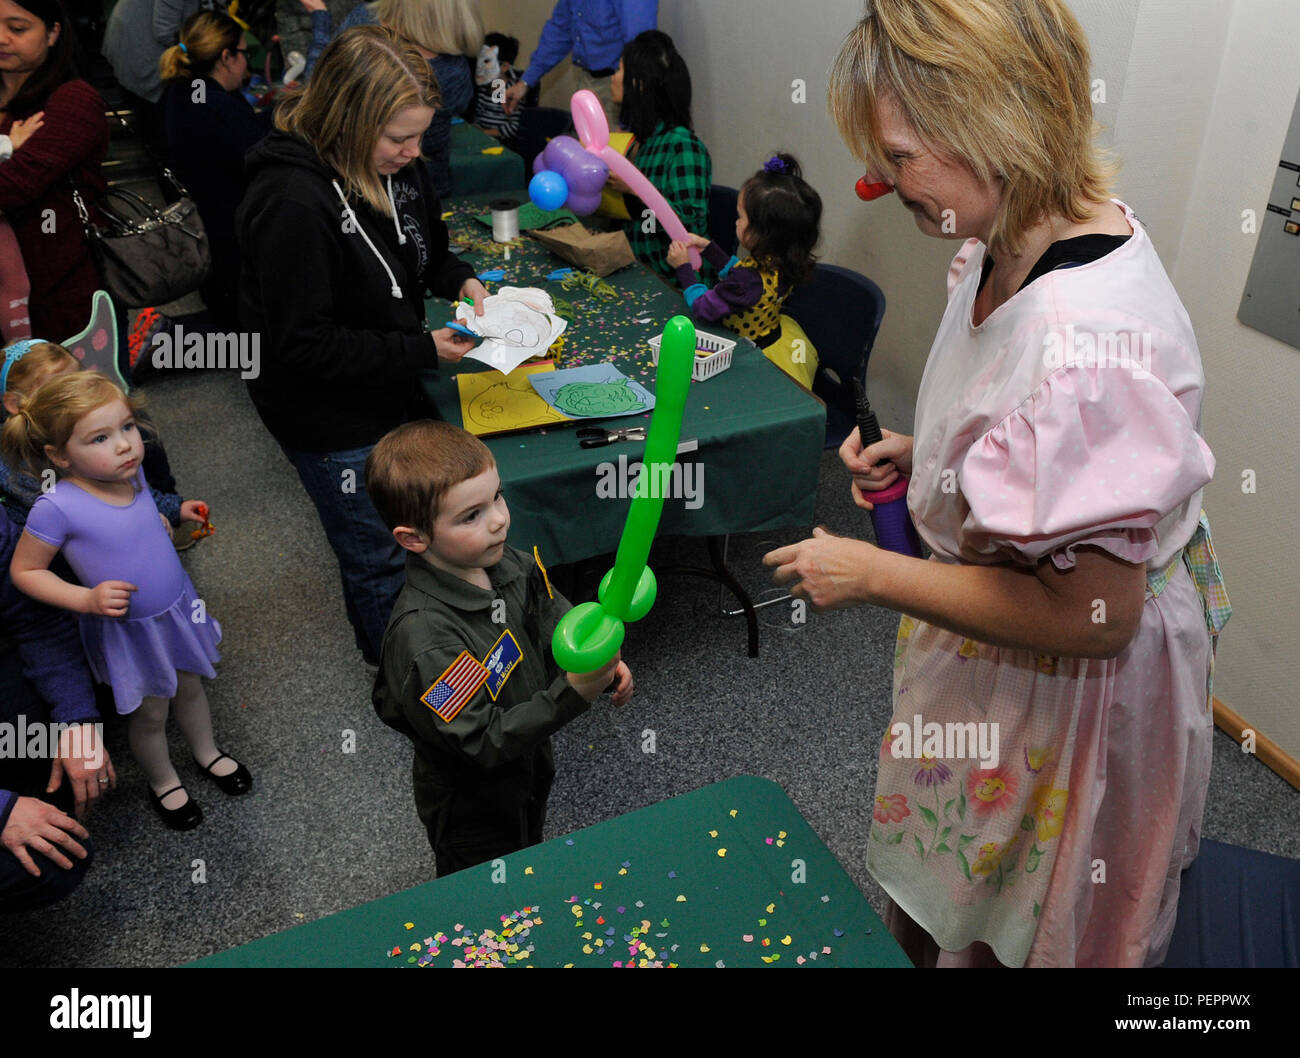 Tina Kamber, a balloon artist, makes a balloon sword for a child during a Kinder Fasching celebration Jan. 25, 2016, at Ramstein Air Base, Germany. The event had games, a bounce house, a balloon artist, face painting, popcorn and dance performances. (U.S. Air Force photo/Airman 1st Class Larissa Greatwood) Stock Photo